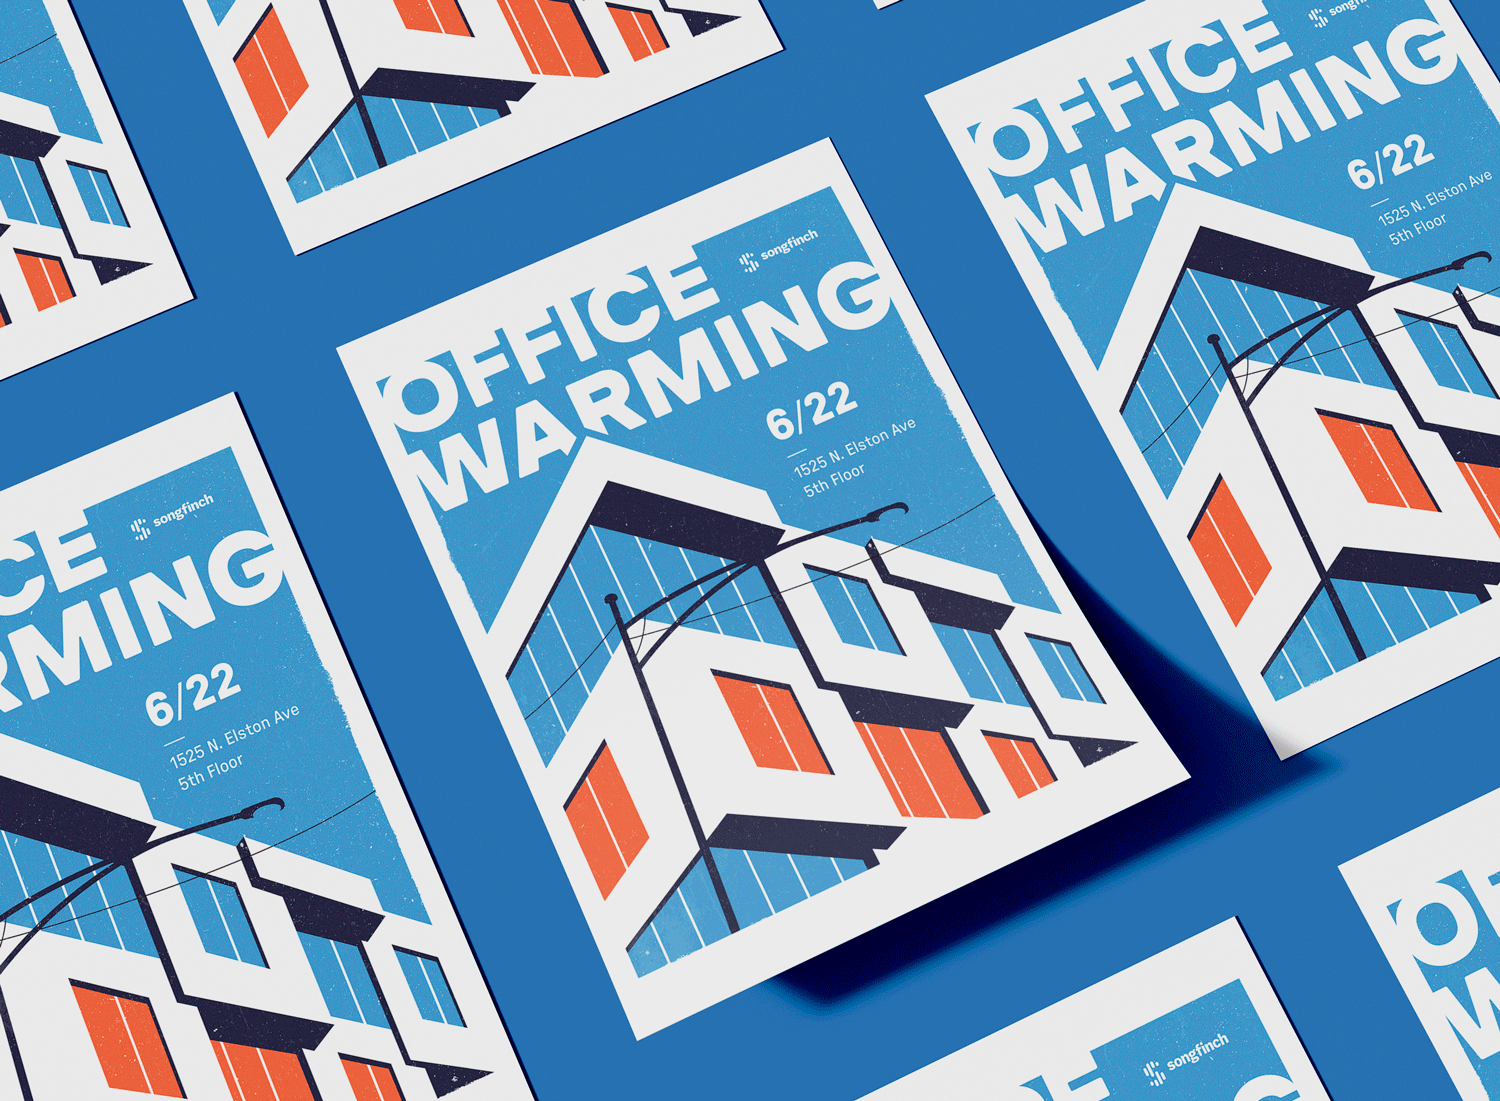 Event Poster - Office Warming Party architecture chicago event event poster illiustration office office warming party poster typography